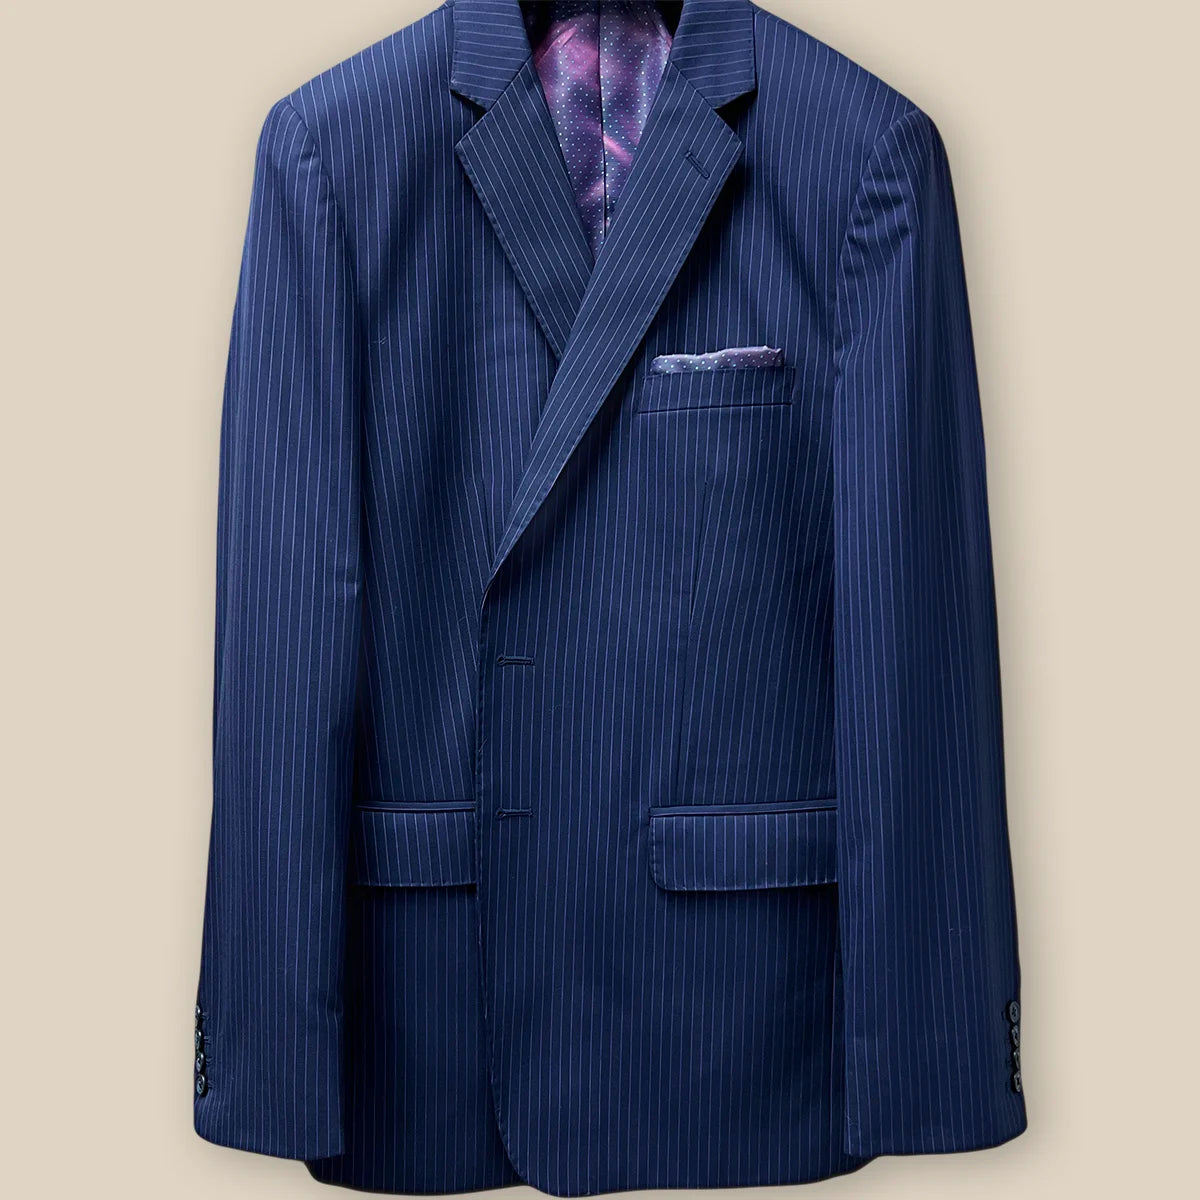 Buttonhole panel view of a navy suit with purple pinstripes, showcasing the detailed craftsmanship.